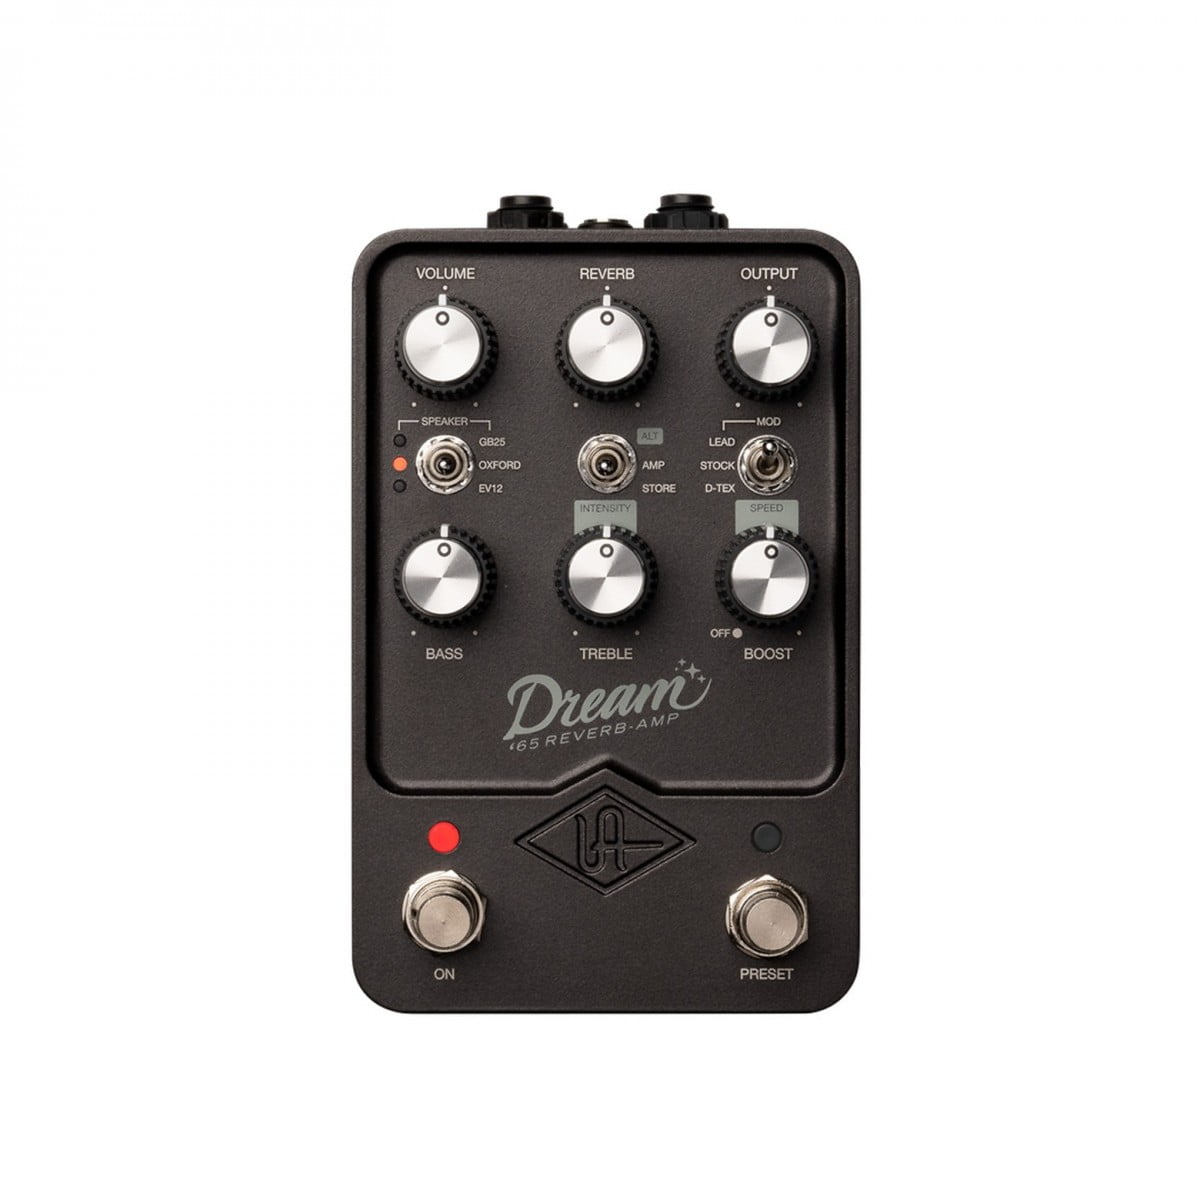 Universal Audio UAFX Dream 65 Reverb Amplifier Pedal - Nearly New - New Universal Audio   Reverb     Vibrato                Guitar Effect Pedal